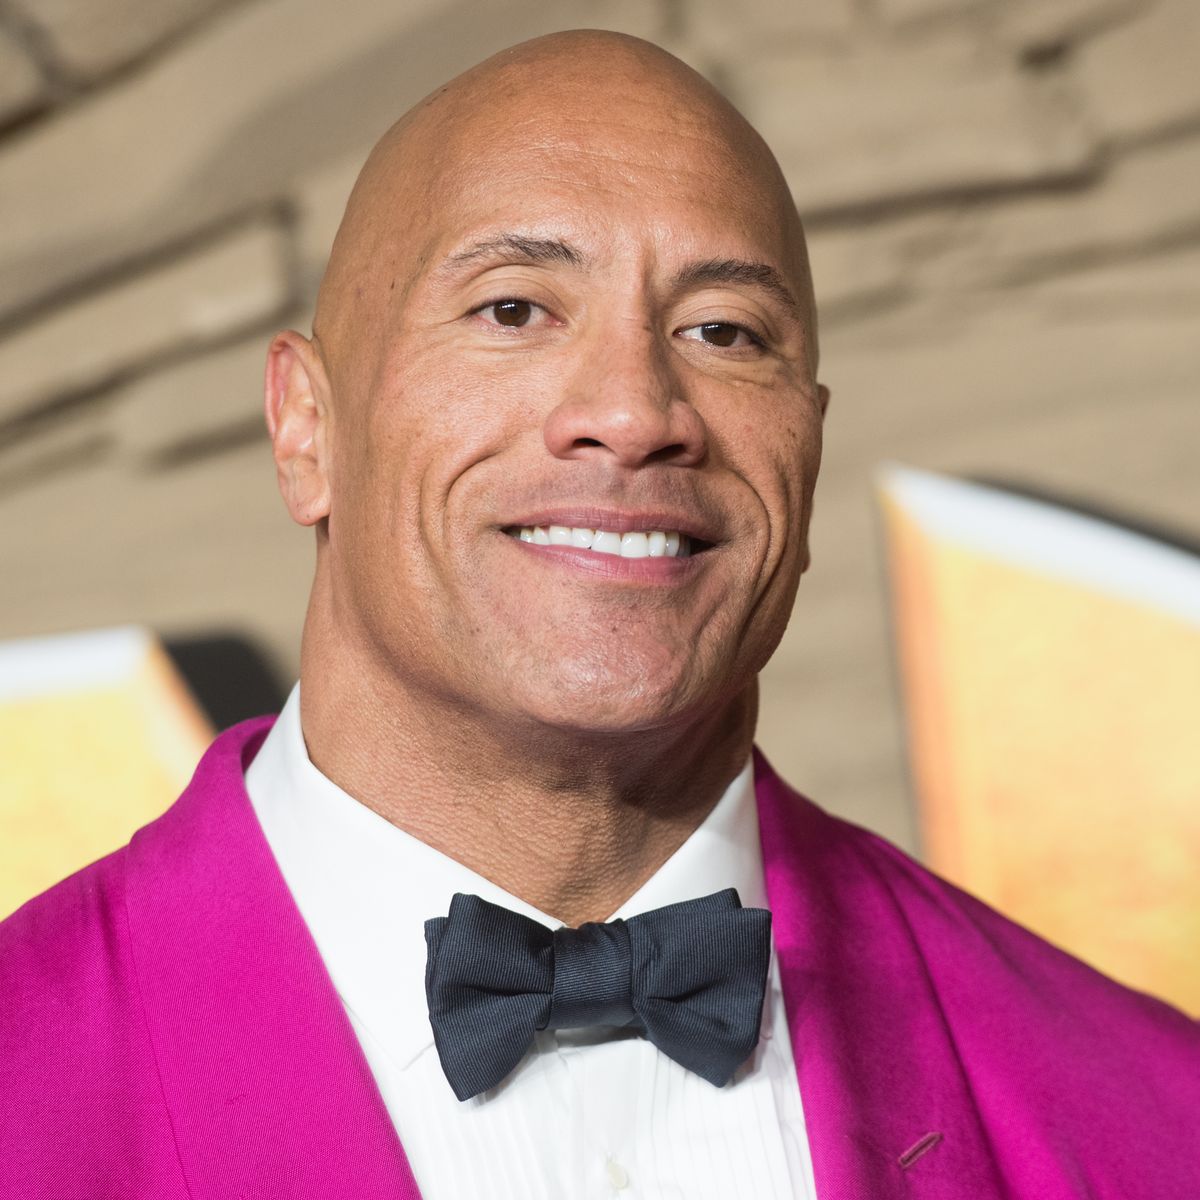 Dwayne Johnson Net worth: How Much is the Rock worth?